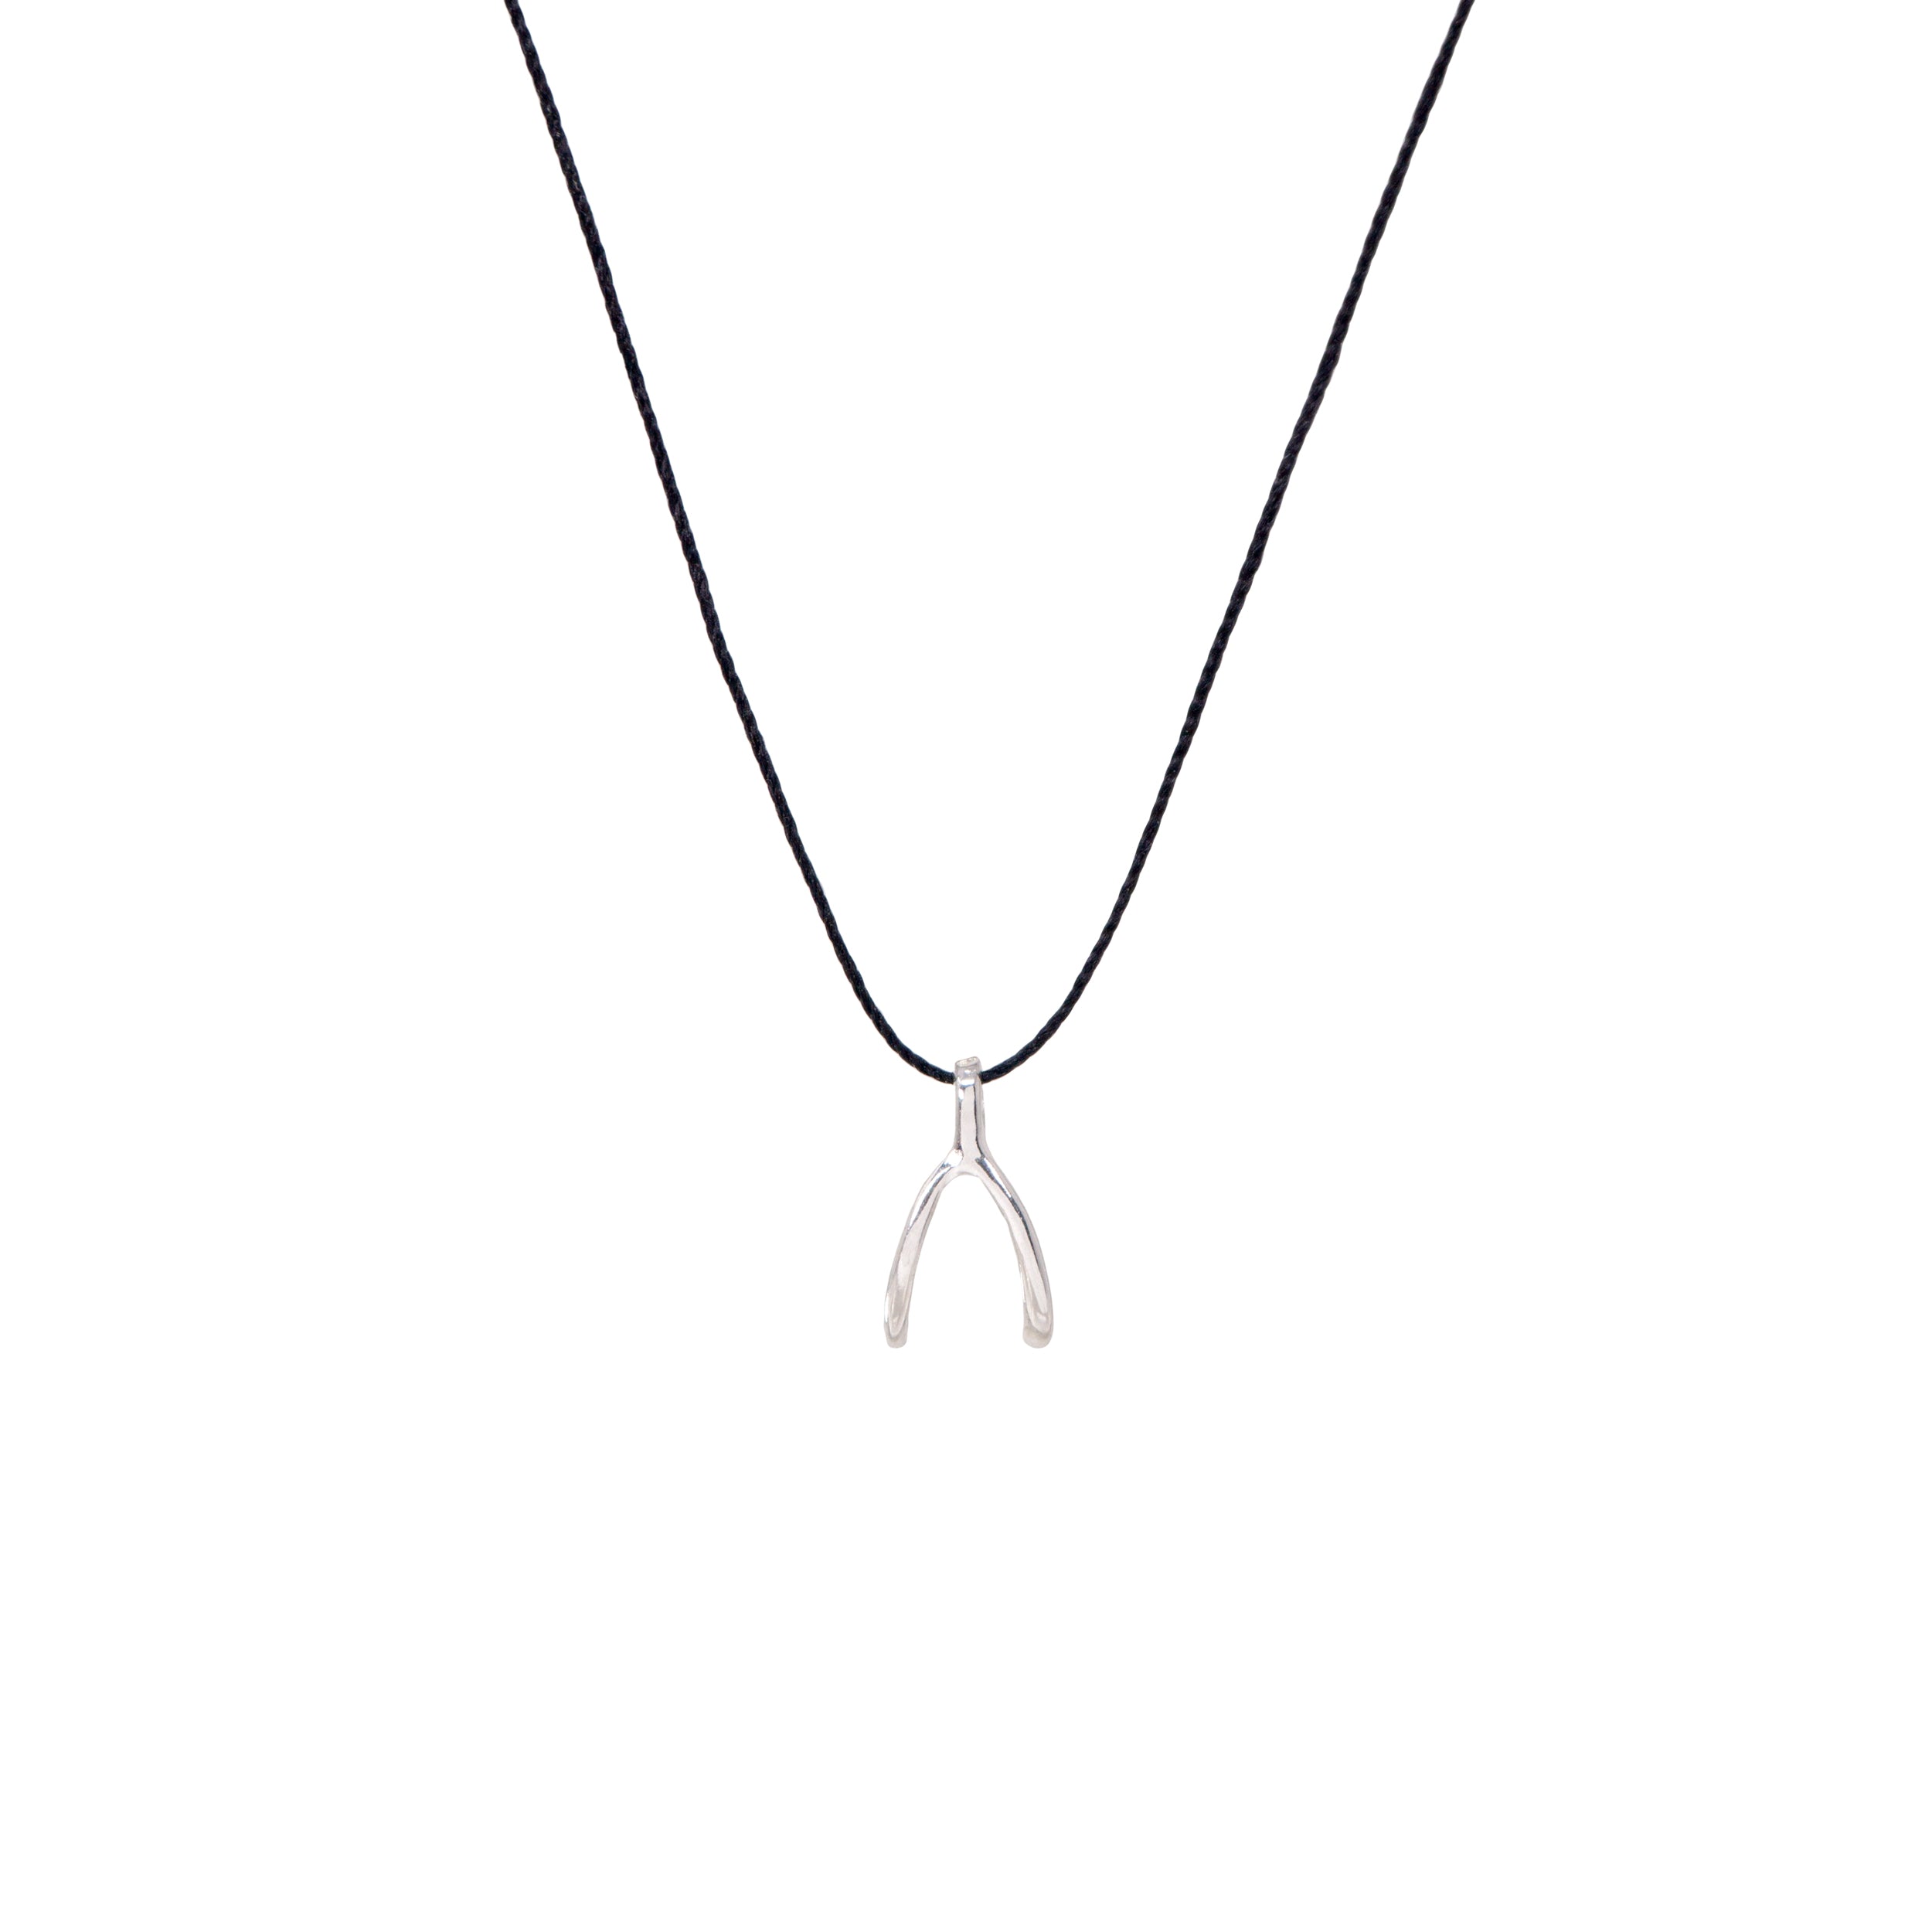 Sterling Silver Cubic Zirconia Wishbone Pendant Necklace